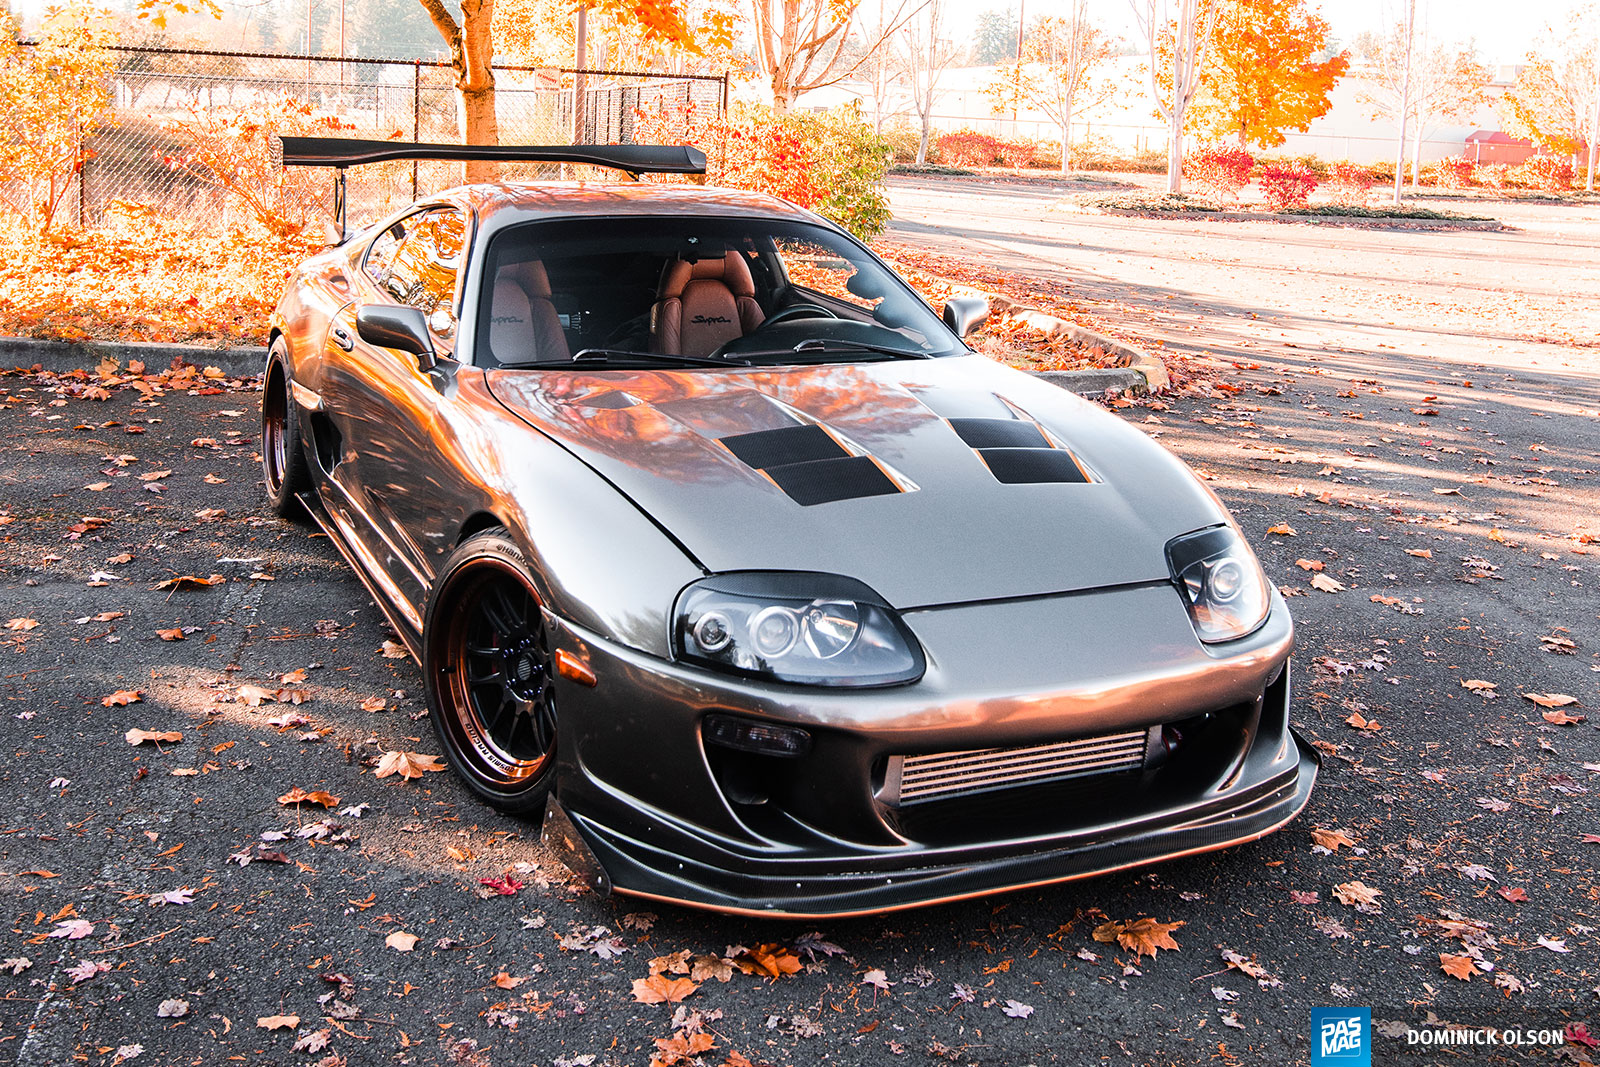 2SHAYT: Shay Bisconer's 1995 Toyota Supra is the Tuner's Source for Modified Car Culture since 1999